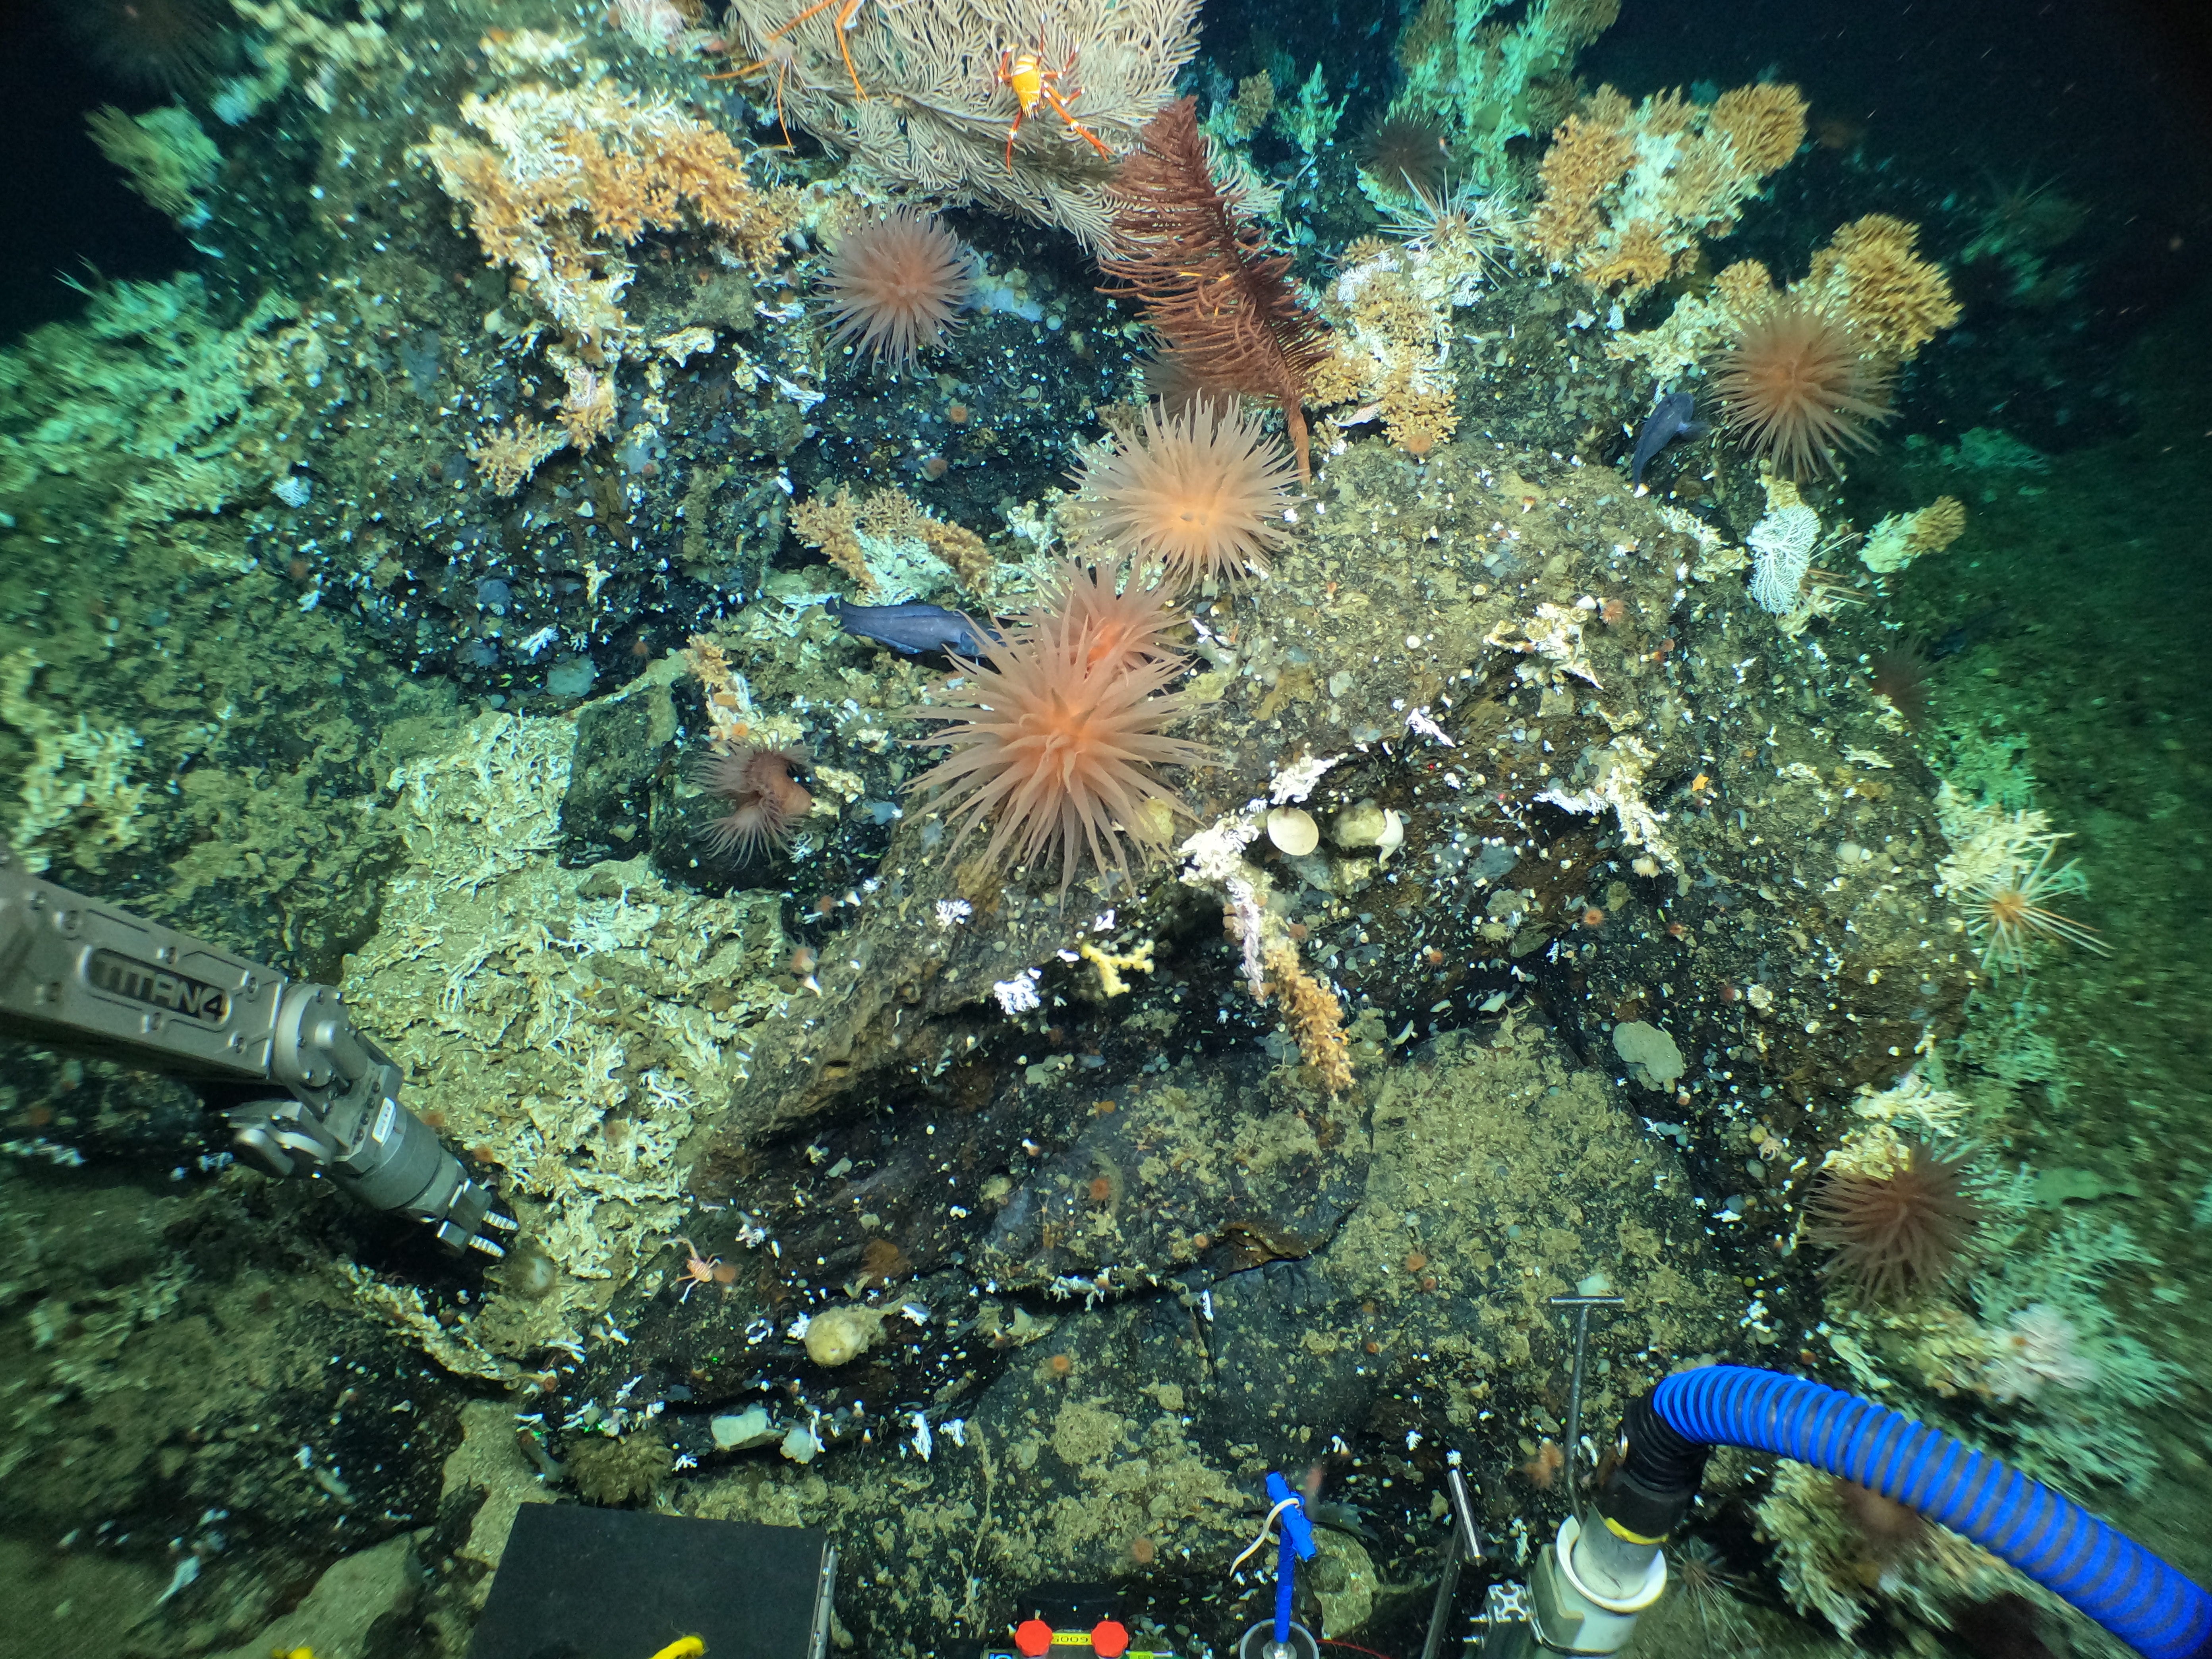 Anemone on rock with some Madrepora coral. (Photo: Image courtesy of L. Robinson (U. Bristol), D. Fornari (WHOI), M. Taylor (U. Essex), D. Wanless (Boise State U.) NSF/NERC/HOV Alvin/WHOI MISO Facility, 2023 ©Woods Hole Oceanographic Institution)